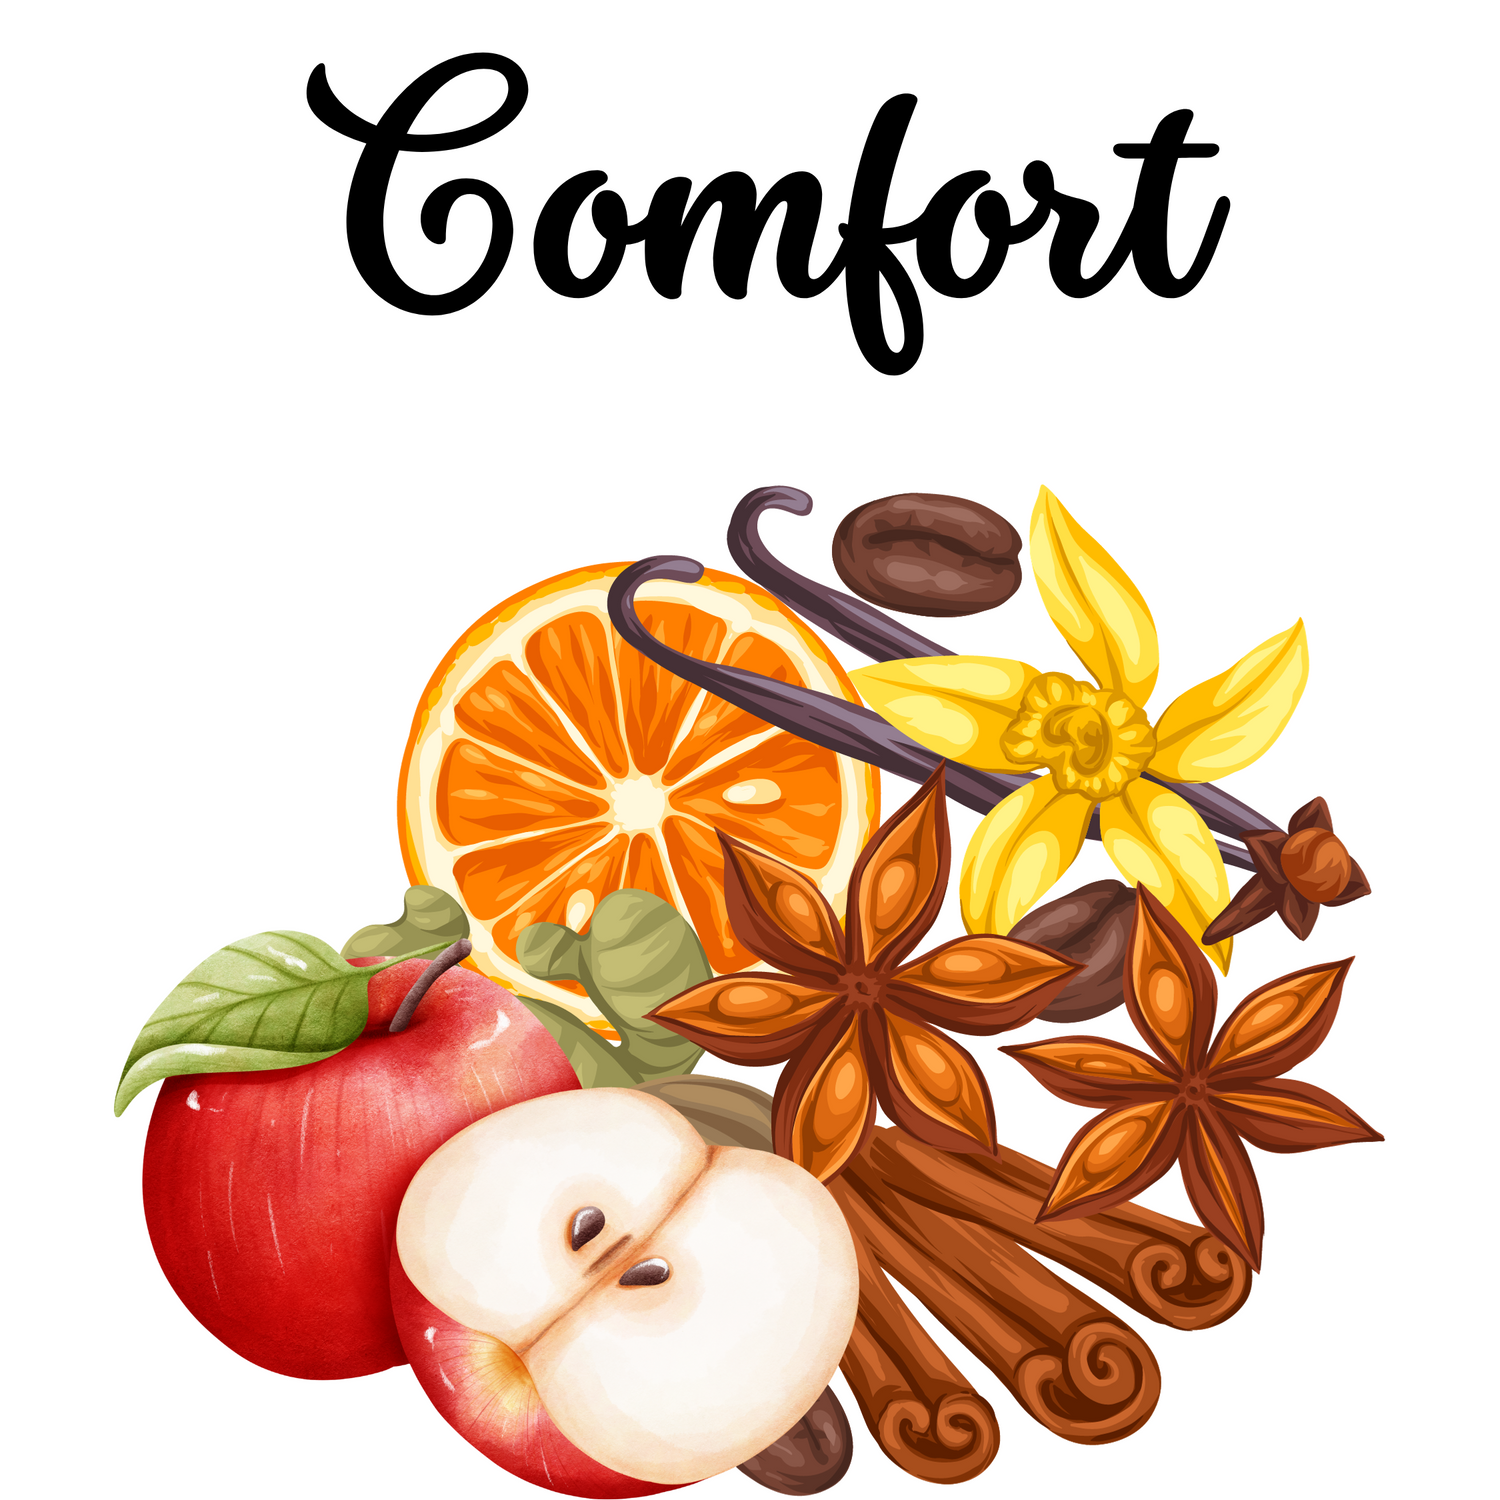 Comfort Collection